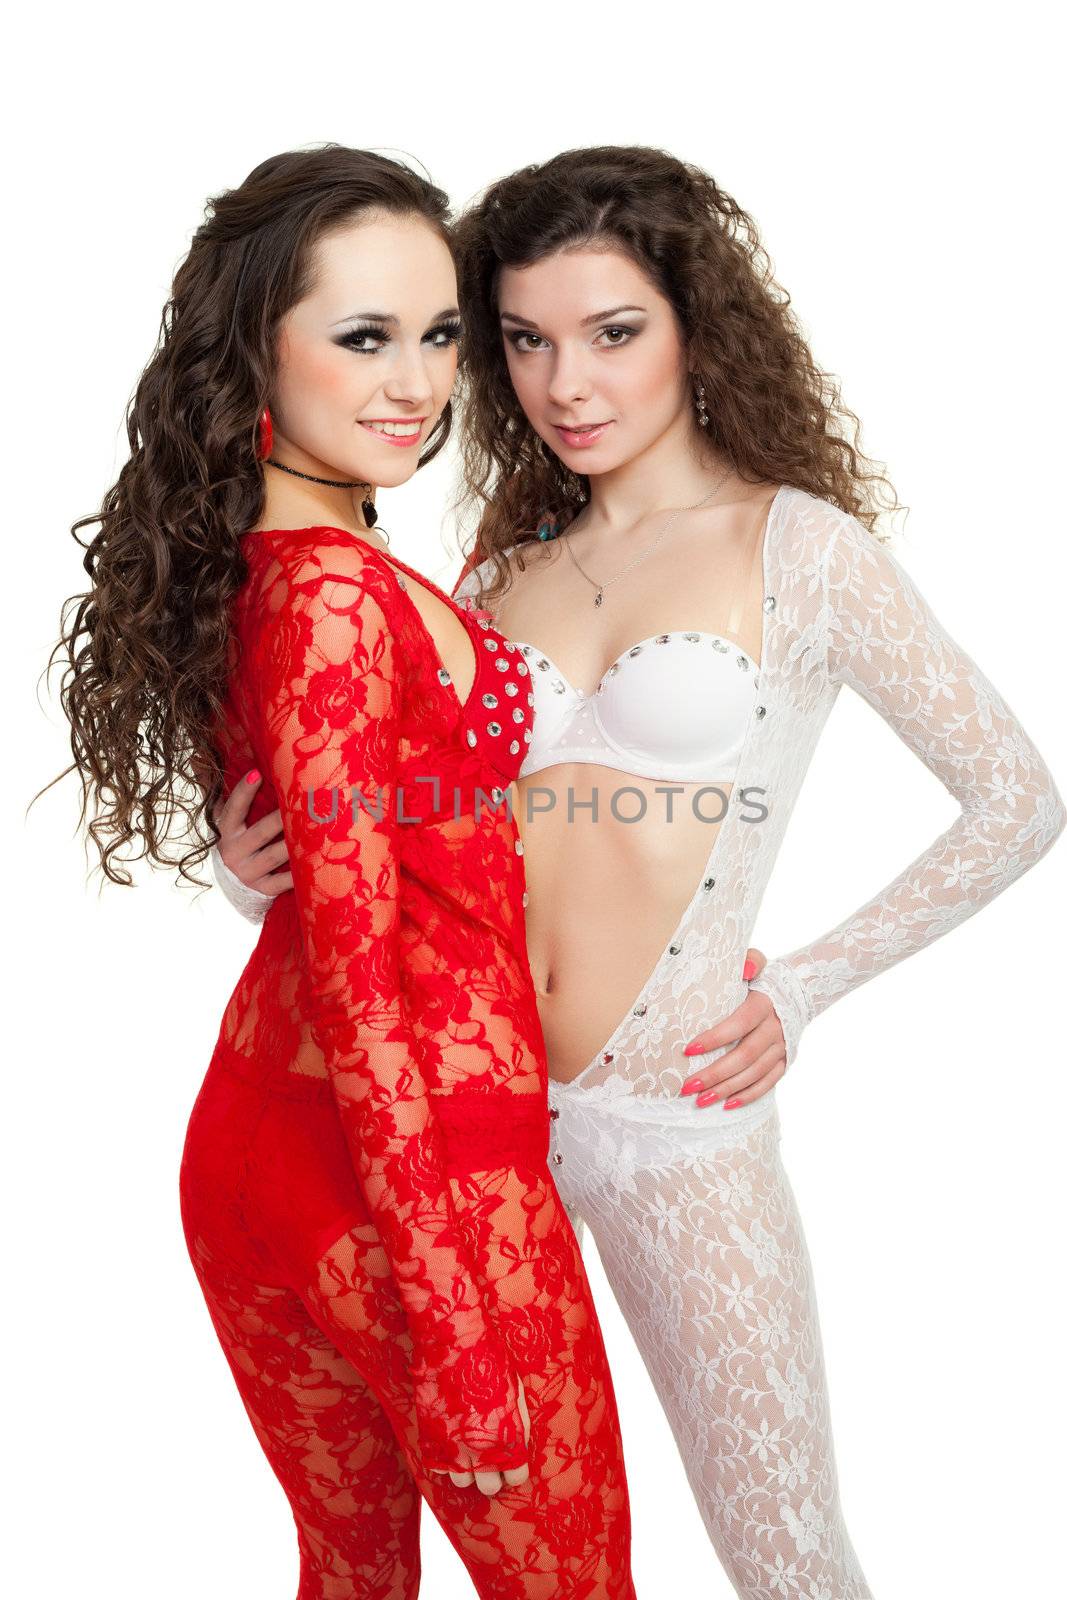 Sexy dancers in piquant dresses posing for photo